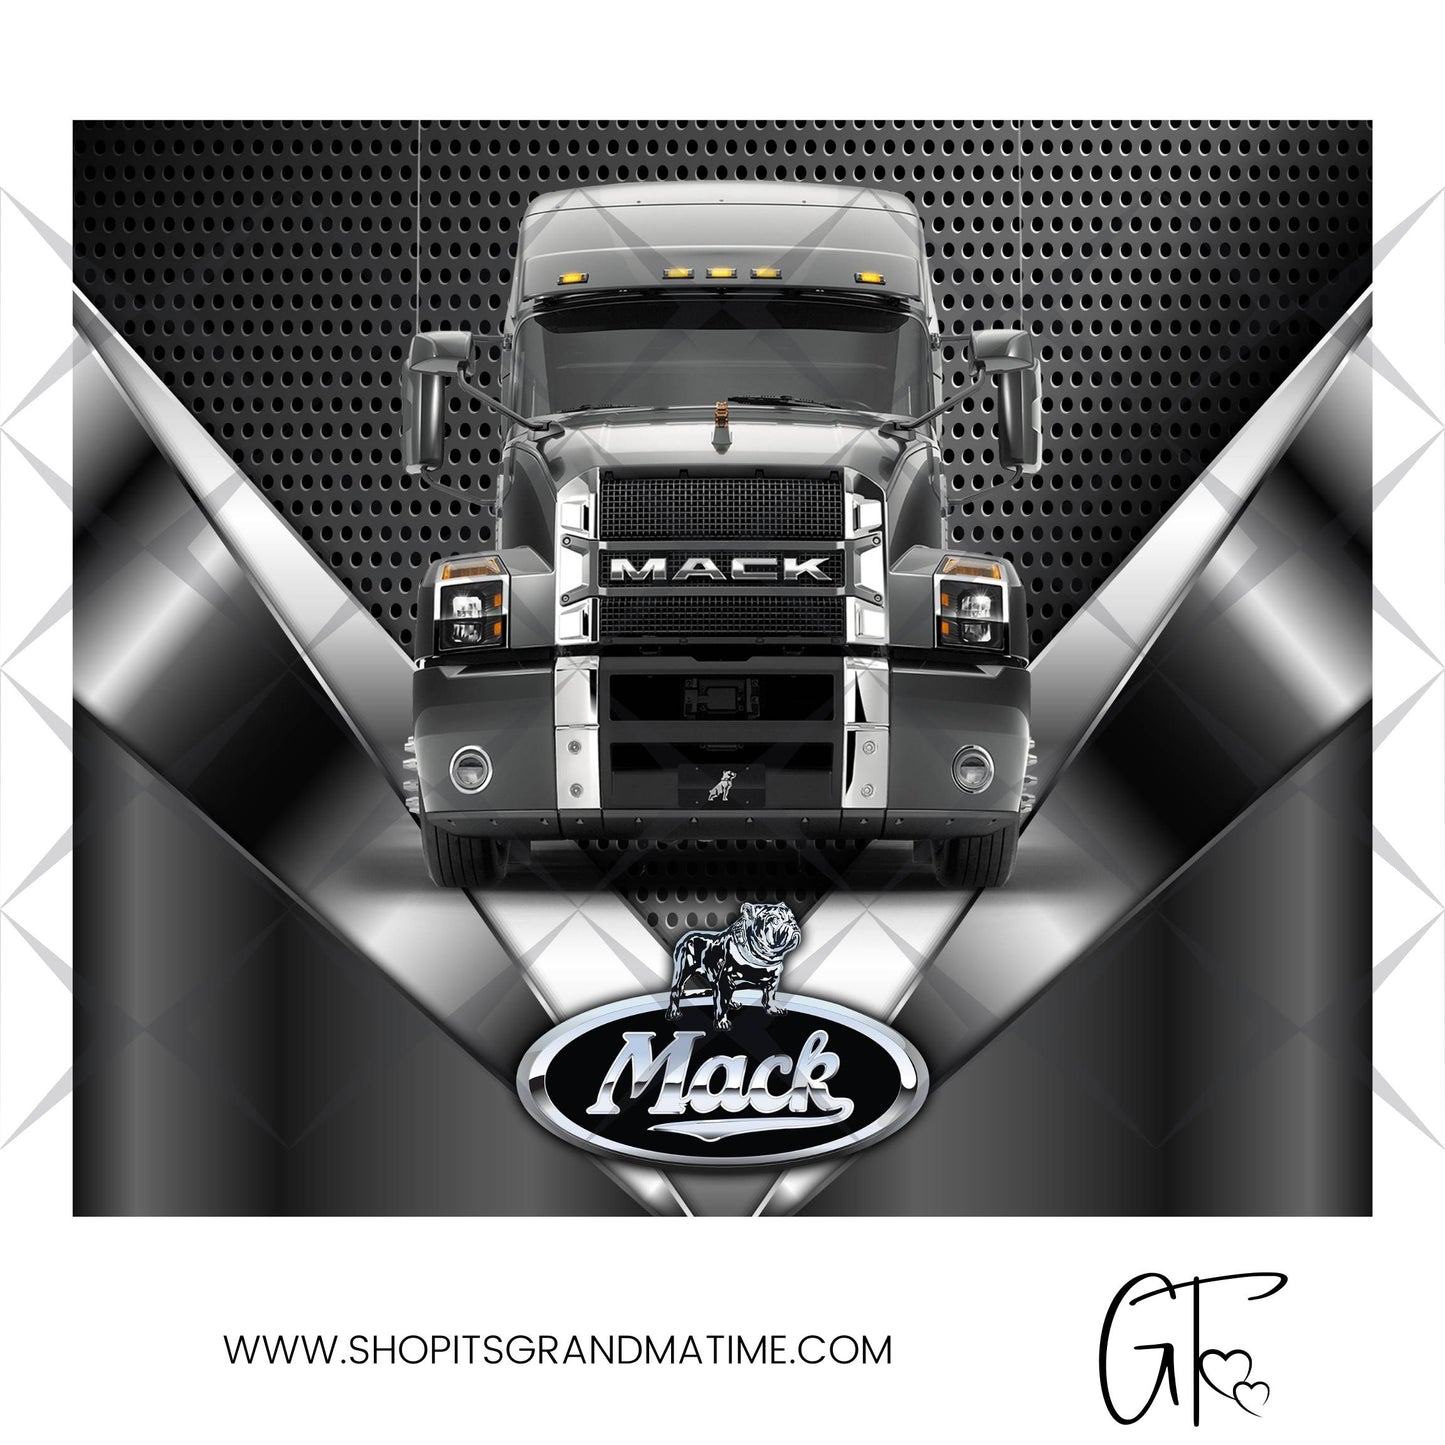 SUB1764 Over-the-road Trucker Tumbler Sublimation Transfer